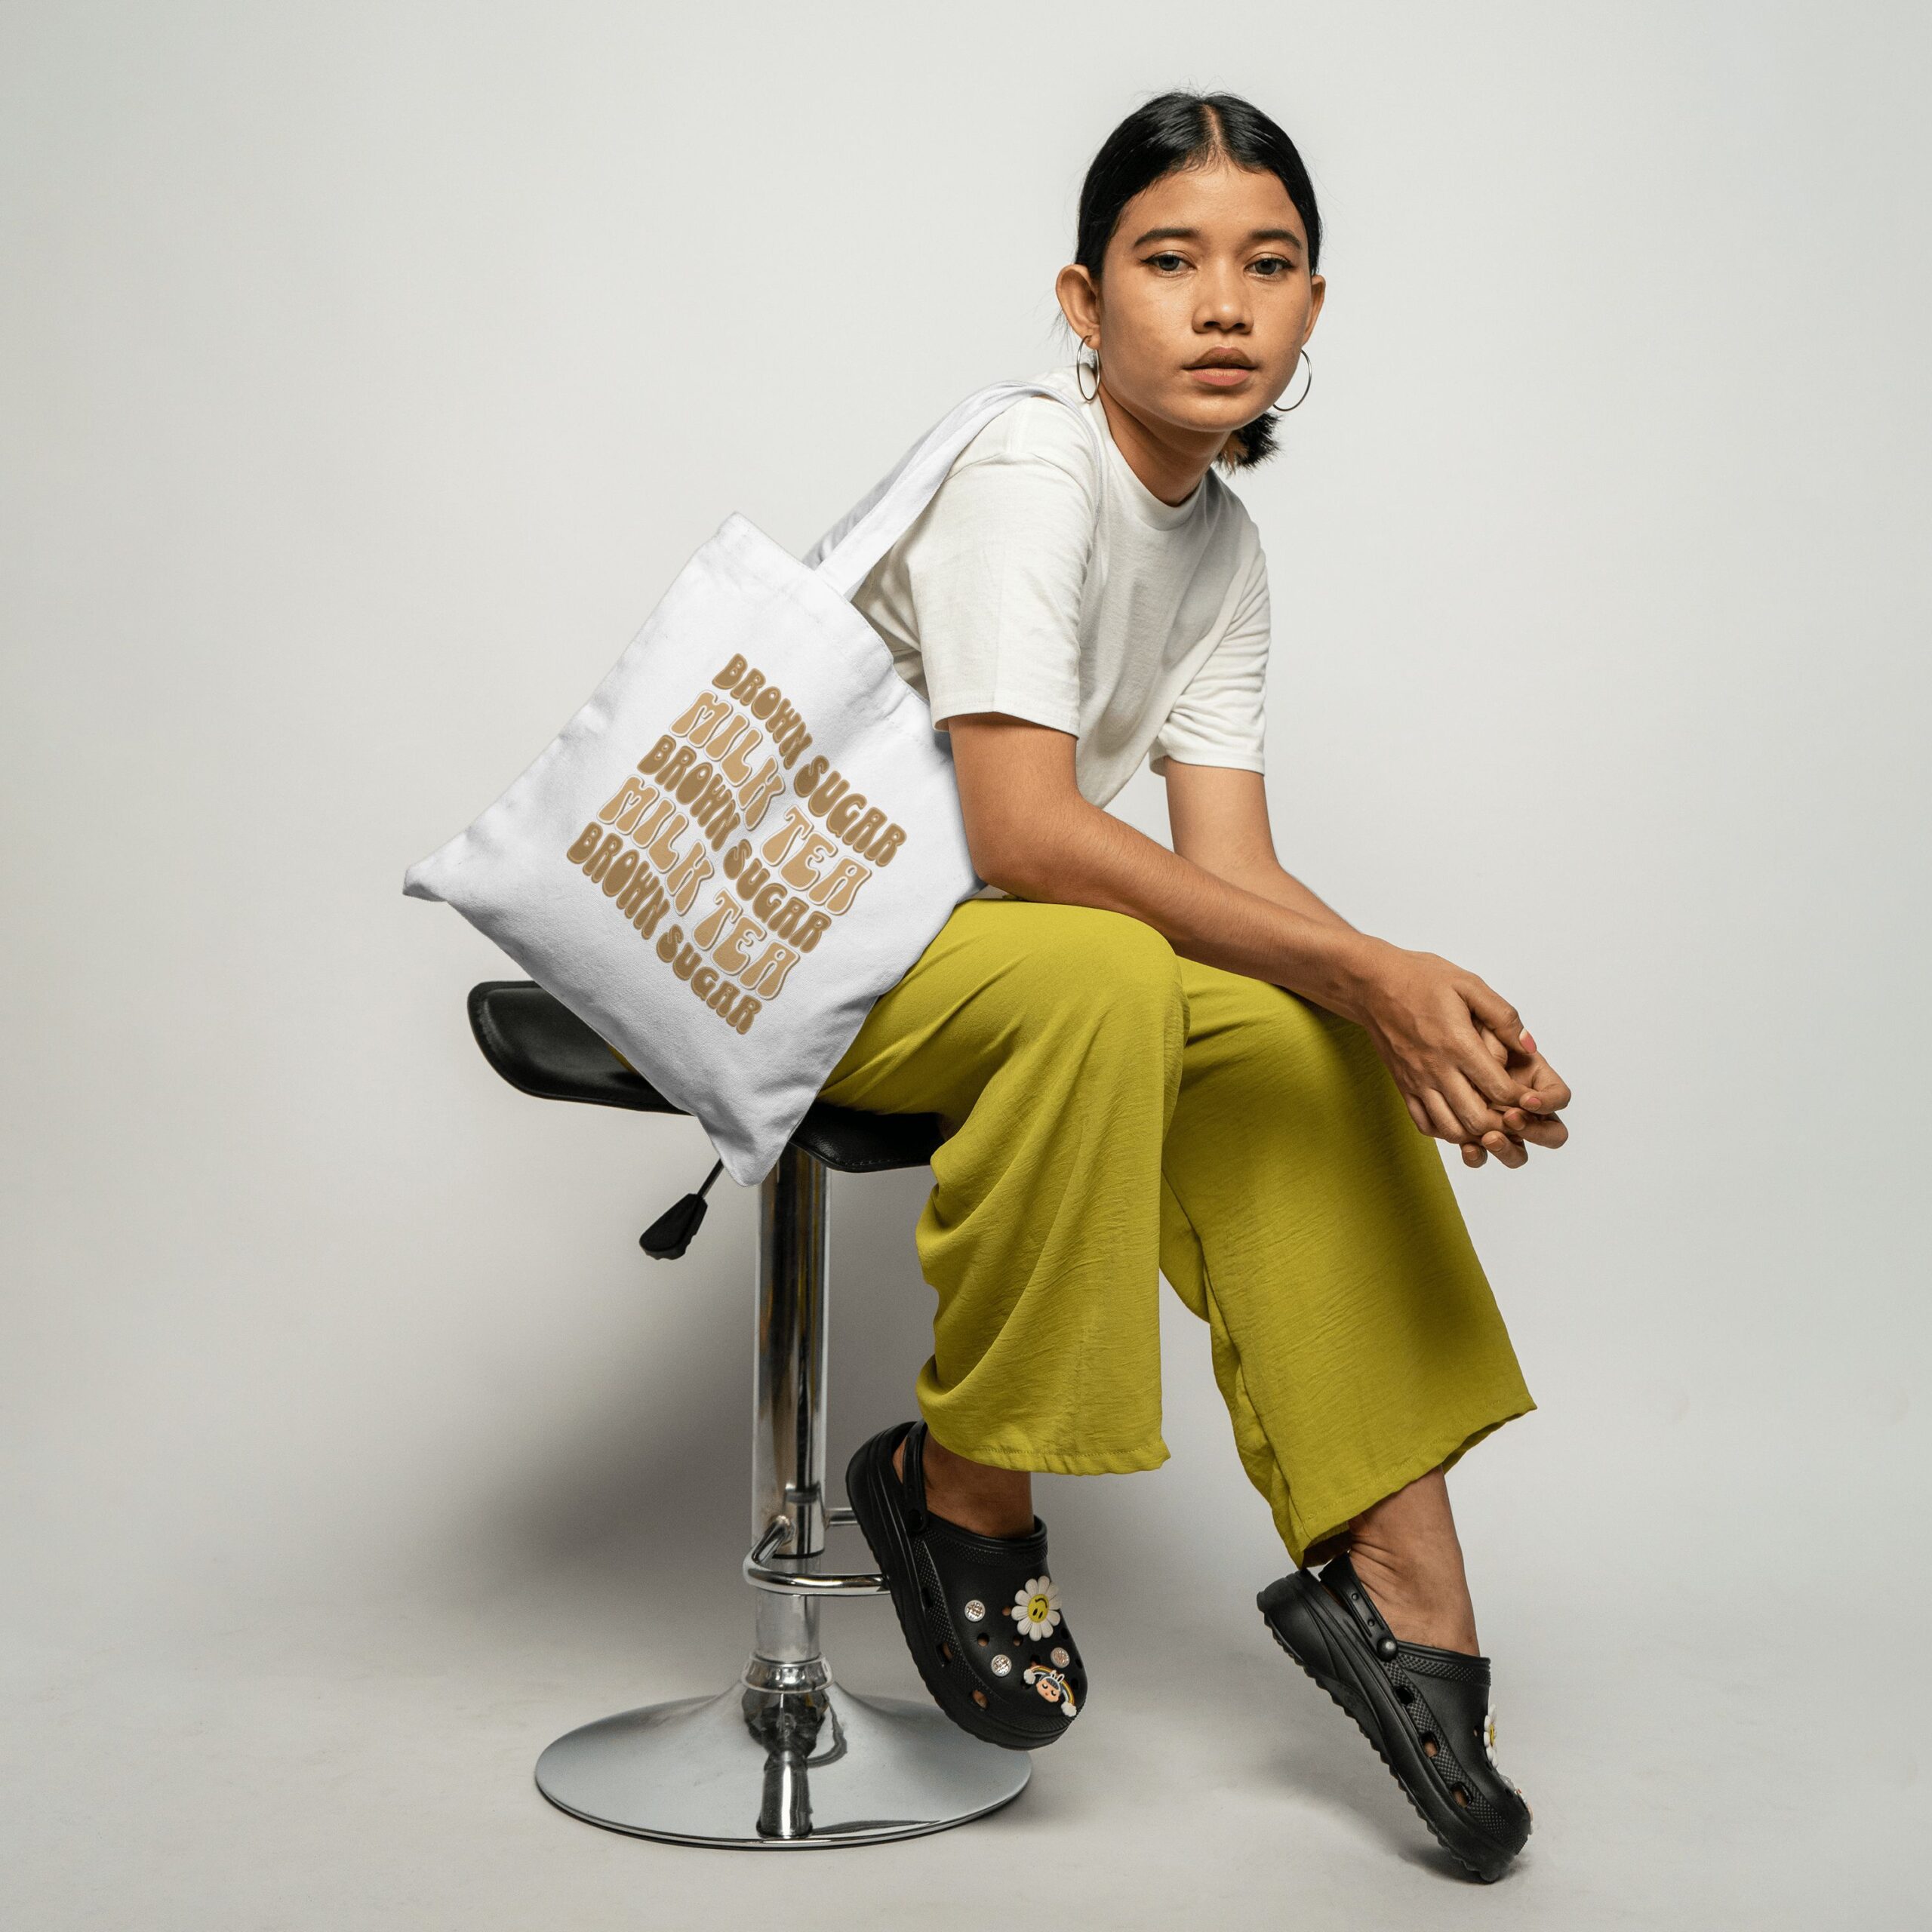 Stylish Tote Bags That Will Make Heads Turn